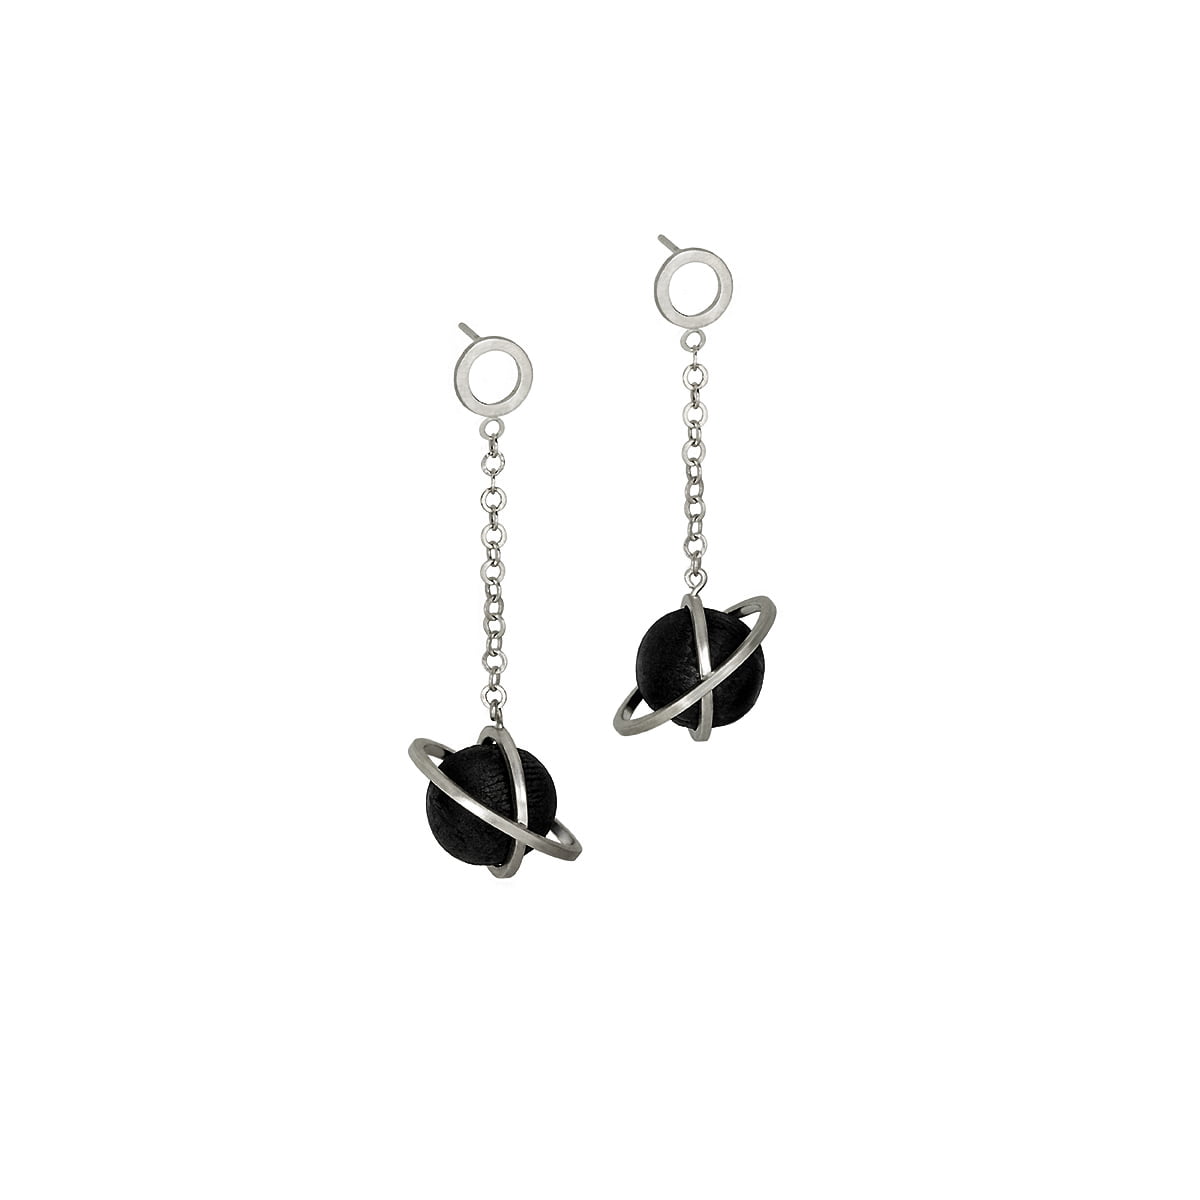 Entanglemenl earrings from the Quantum collection, handcrafted by Julie Bégin using pure sterling silver and hand charred wood.